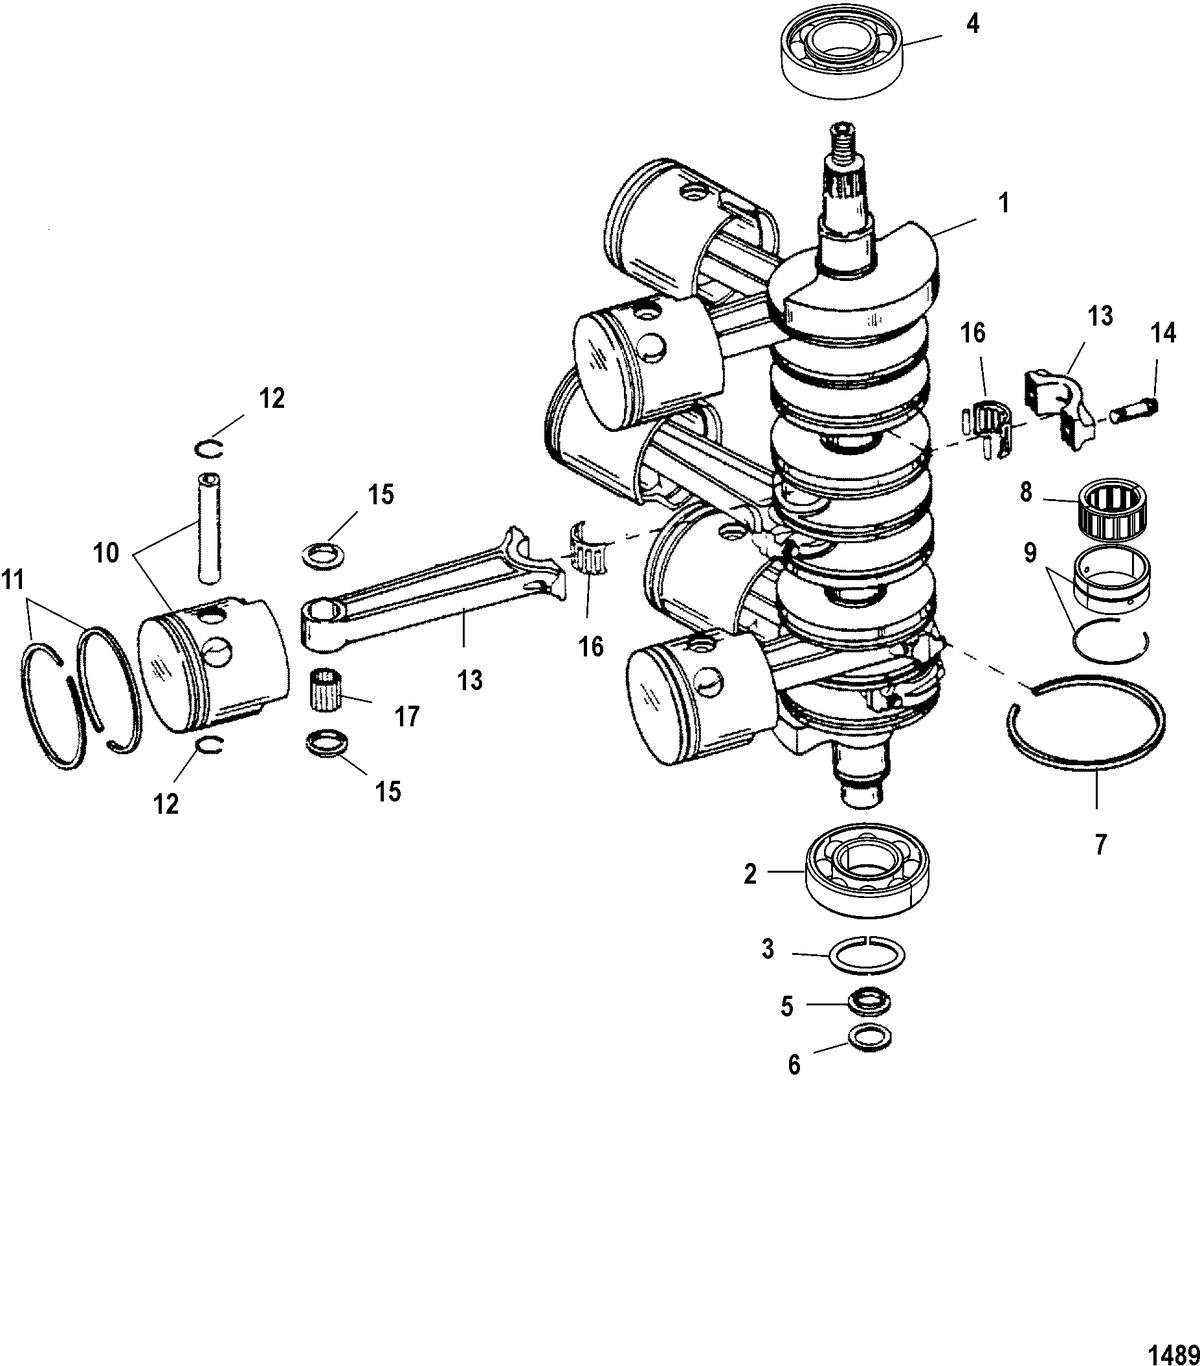 RACE OUTBOARD 2.5L/2.5L OFFSHORE EFI Crankshaft, Pistons and Connecting Rods